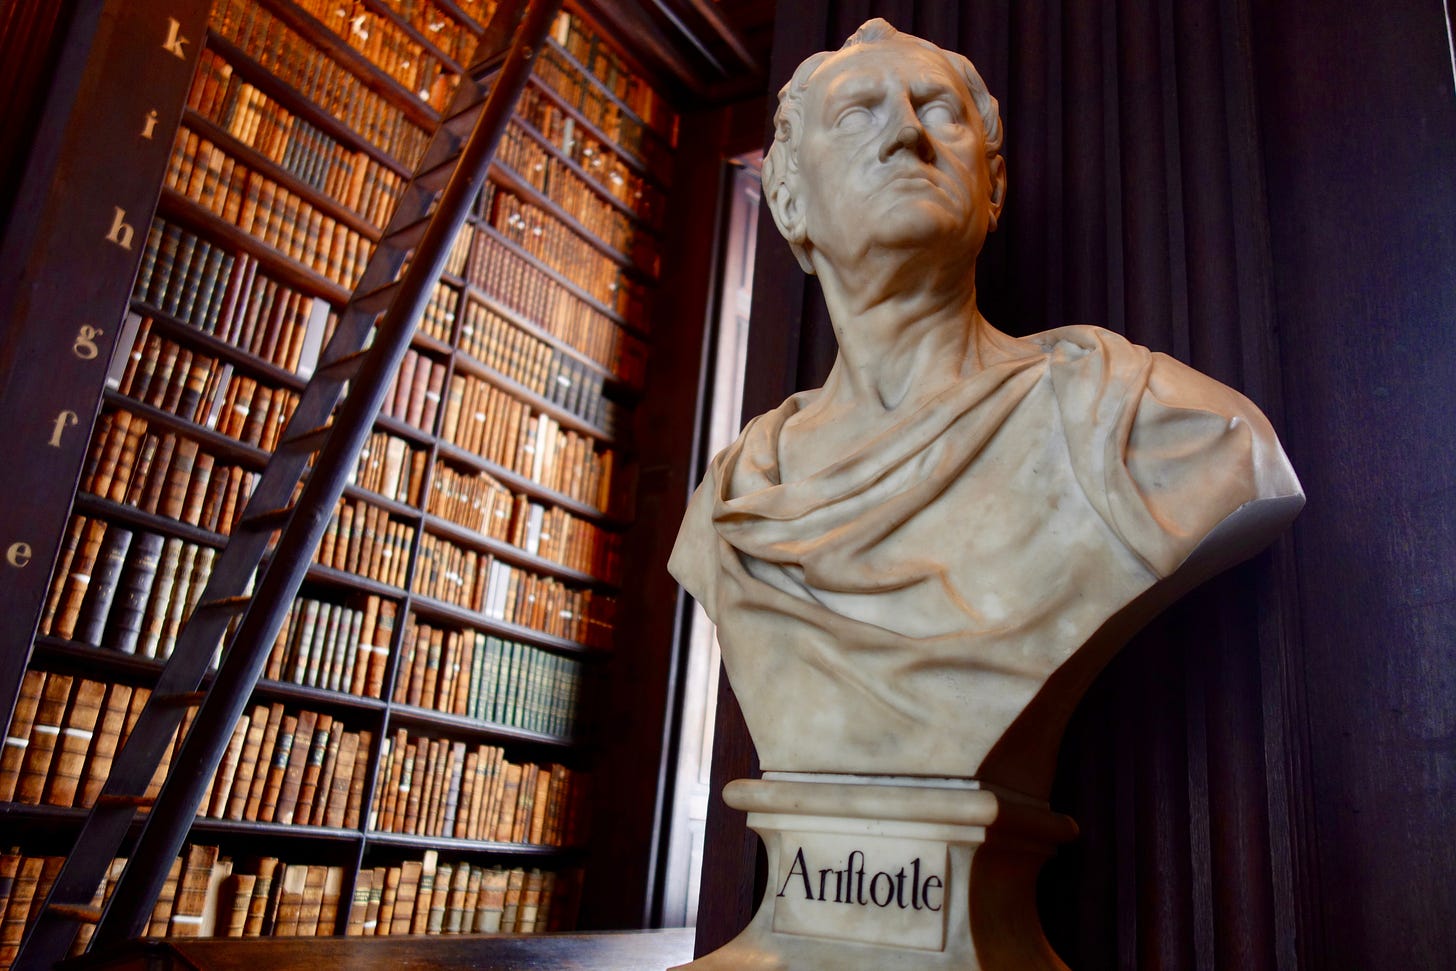 https://upload.wikimedia.org/wikipedia/commons/a/a4/Aristotle_Bust_at_Old_Library_%2828214898208%29.jpg